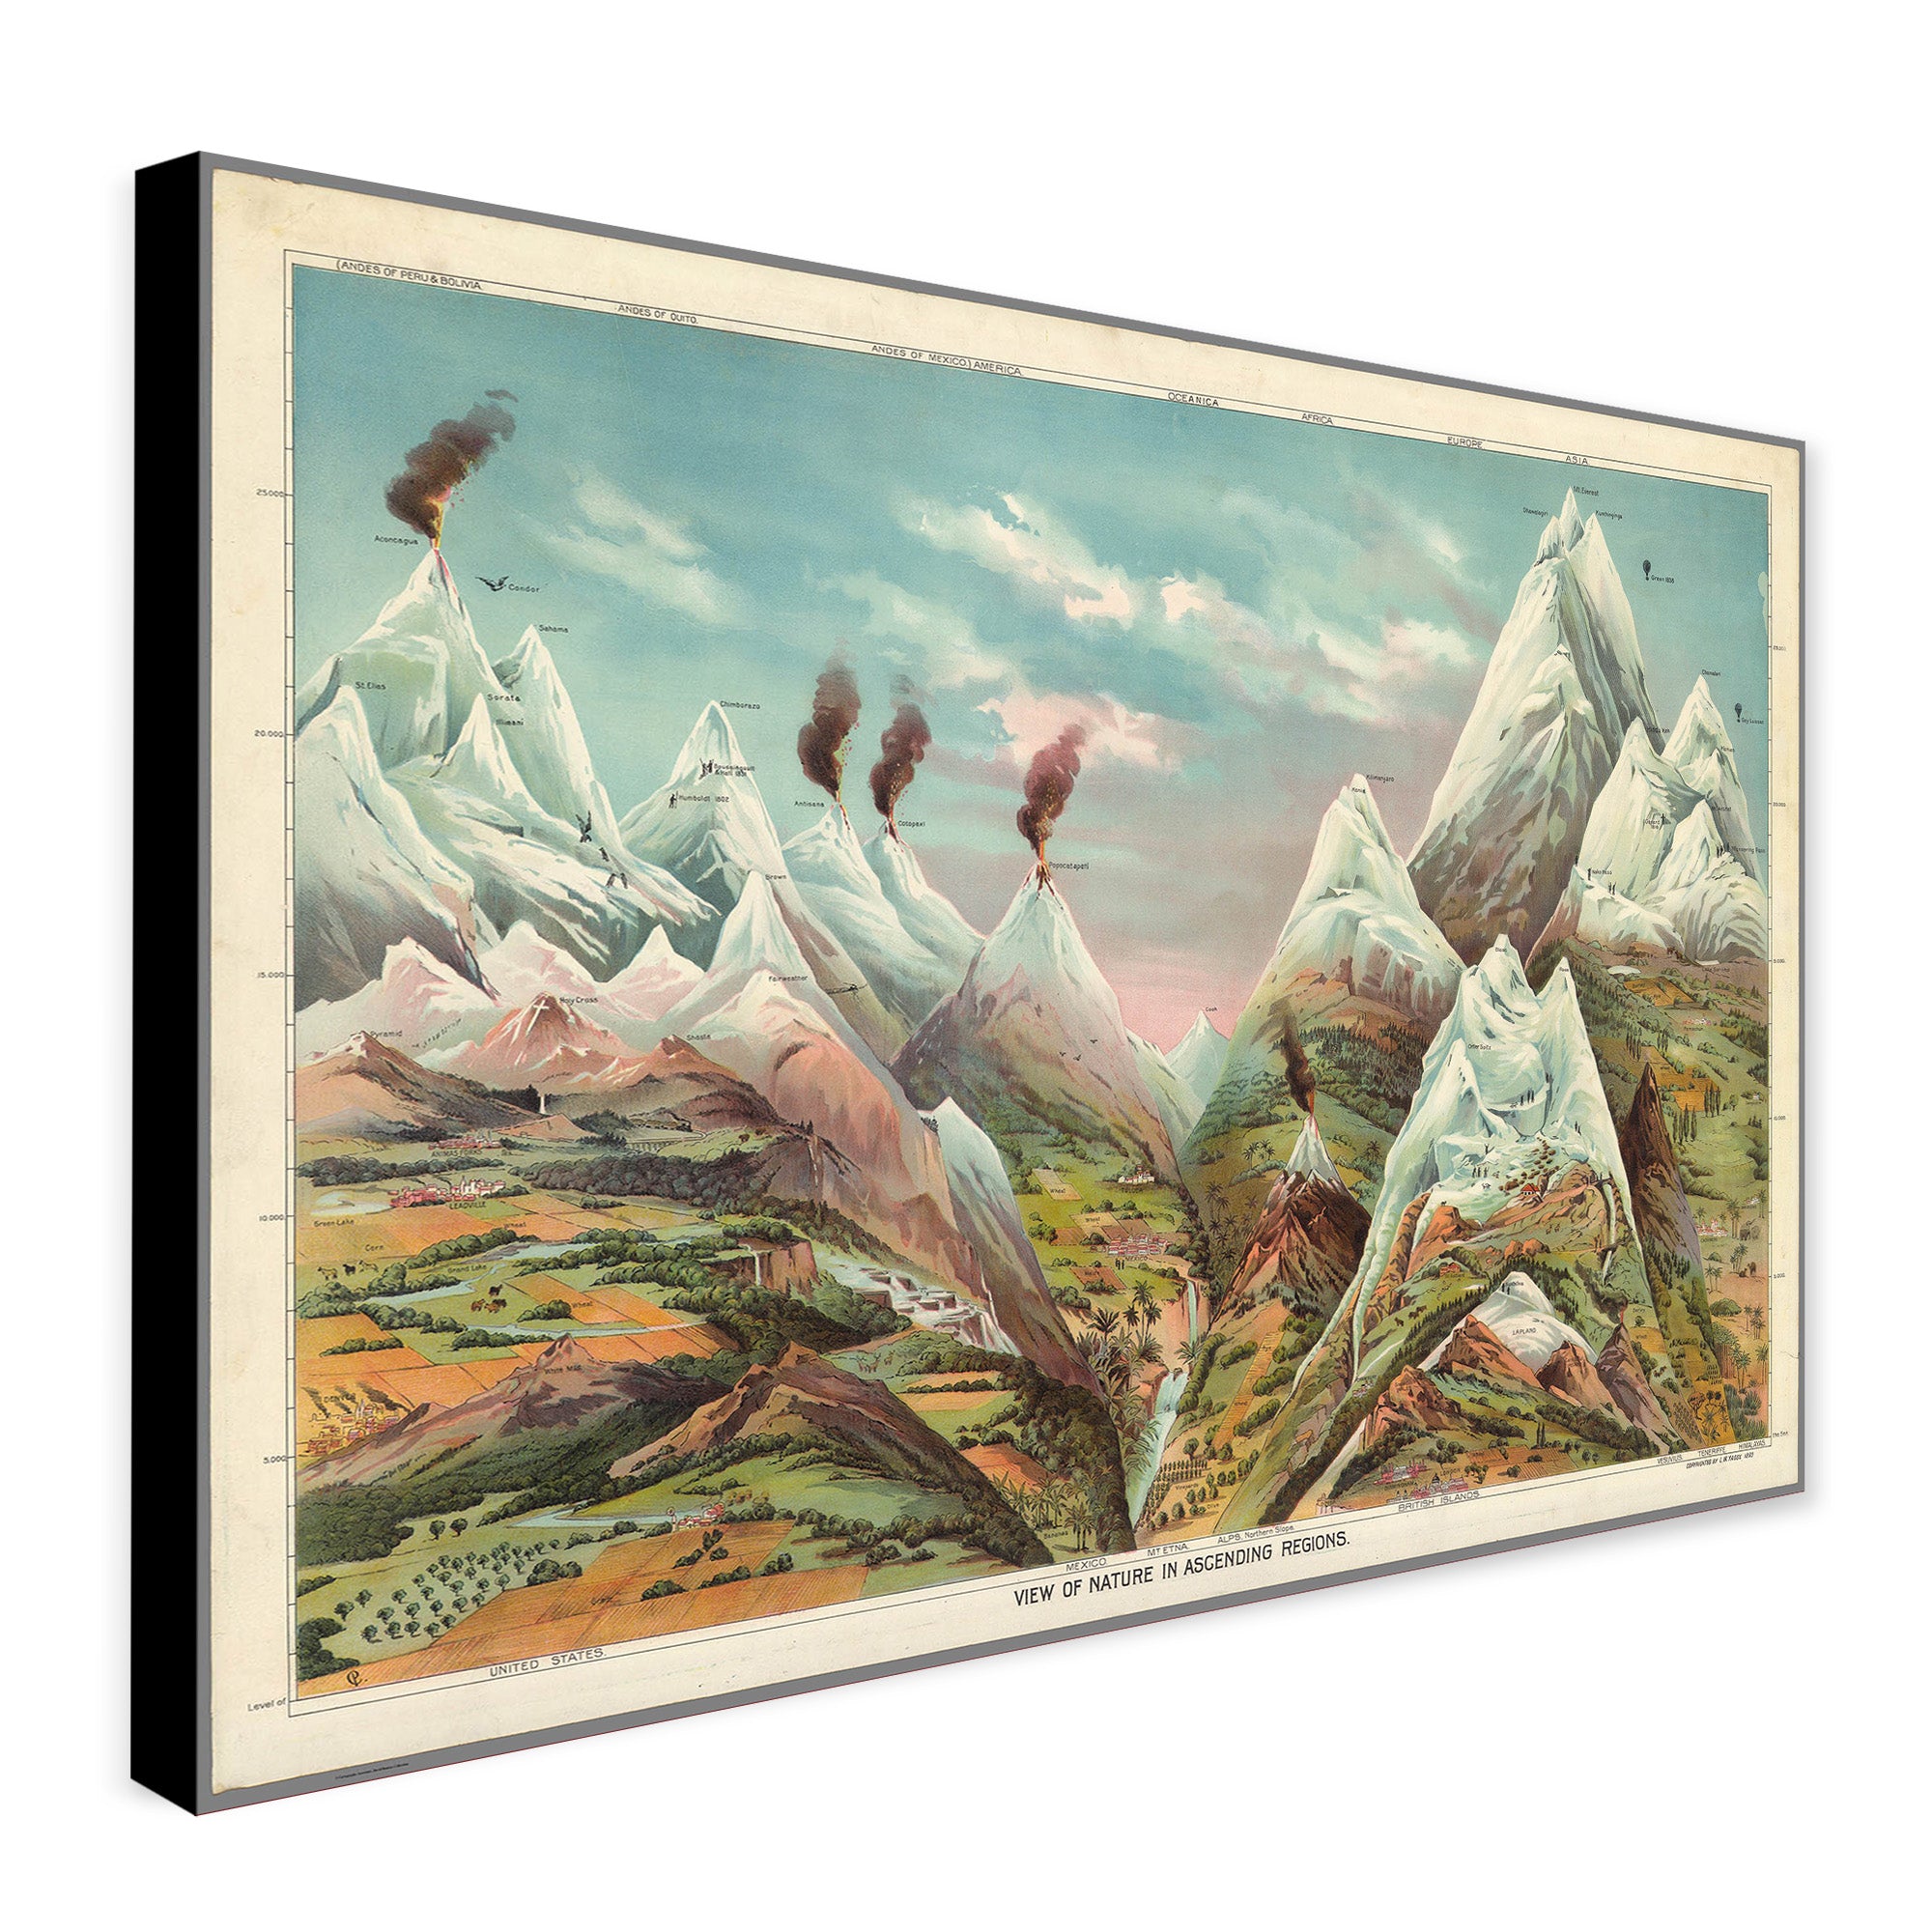 View of Nature in Ascending Regions - Vintage Wall Art by Levi Walter - Canvas Wall Art Framed Print - Various Sizes